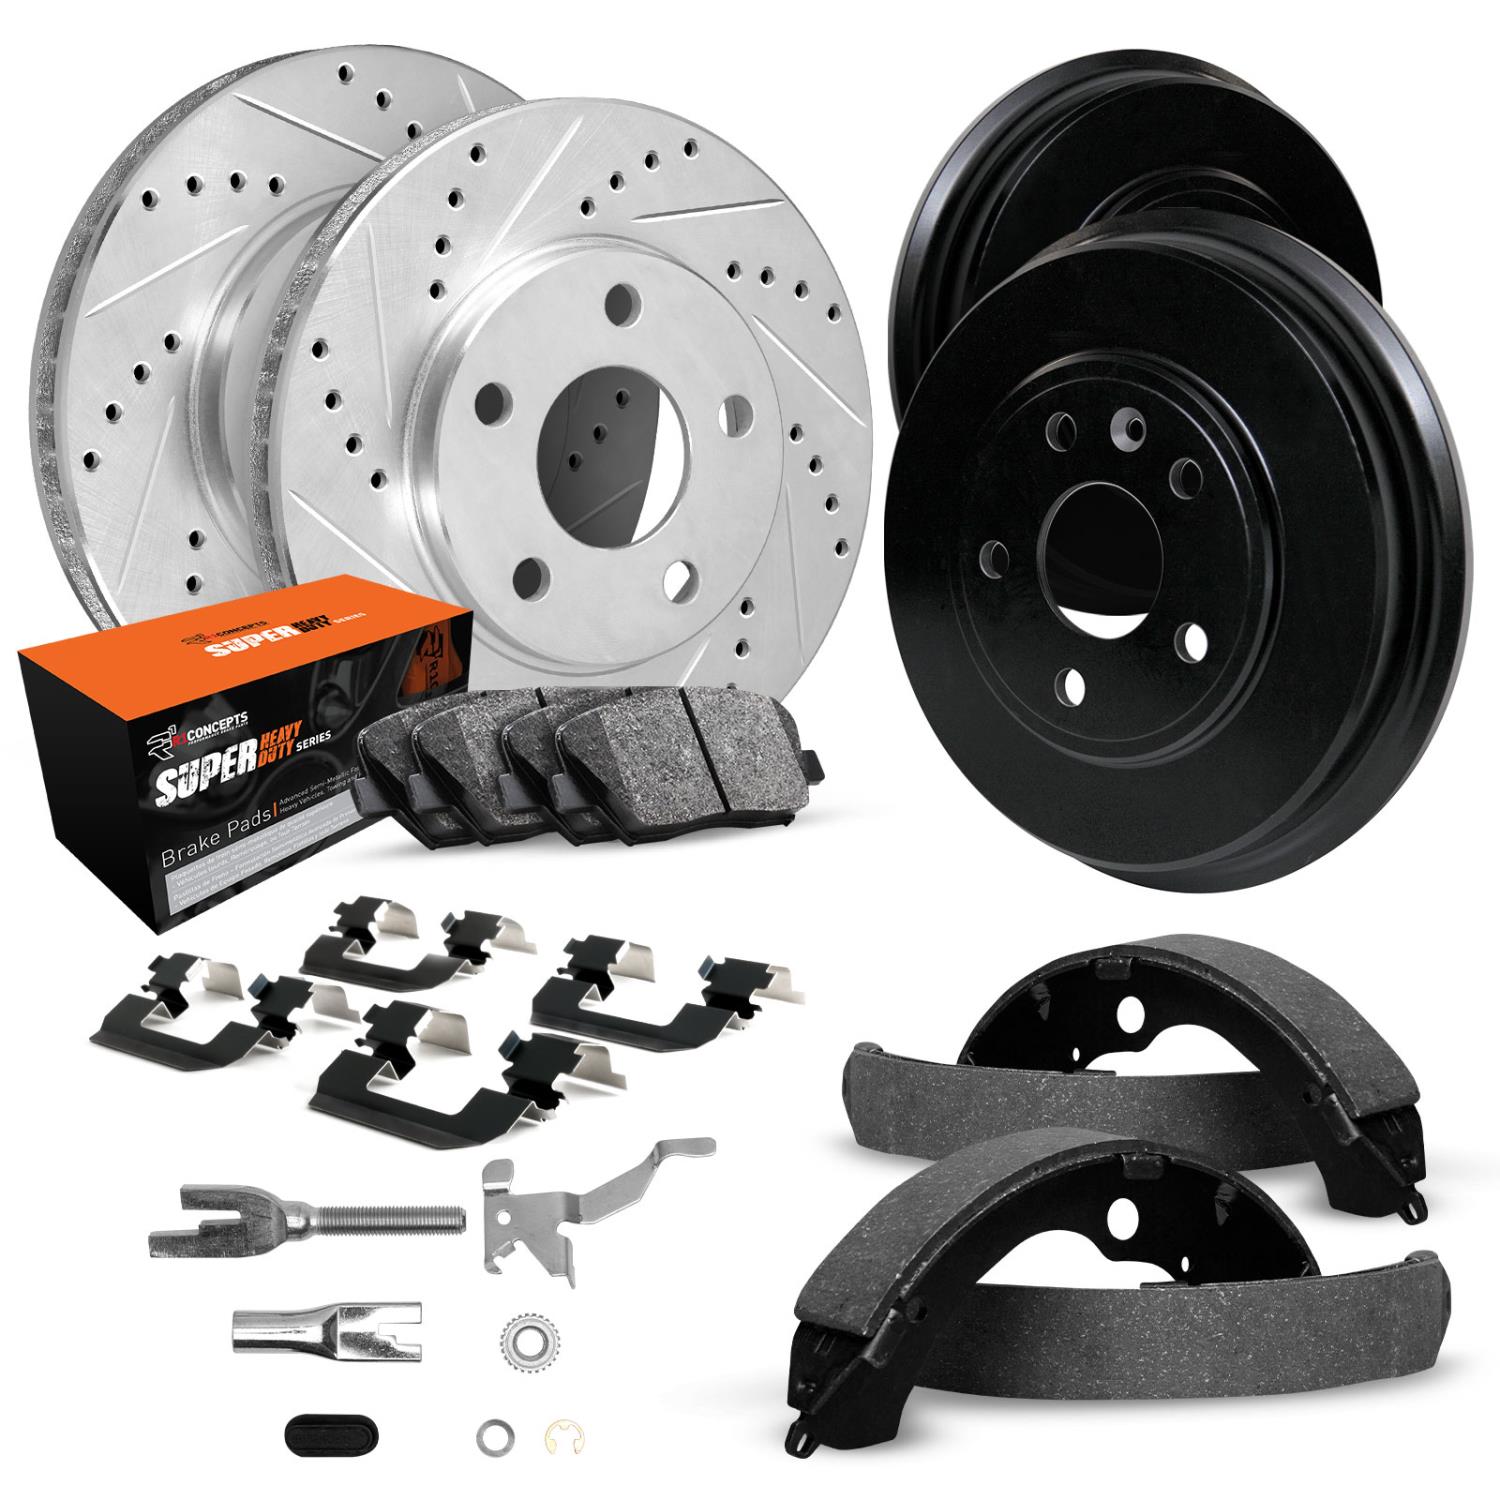 E-Line Drilled/Slotted Silver Rotor & Drum Set w/Super-Duty Pads, Shoes/Hardware/Adjusters, 1986-1993 Ford/Lincoln/Mercury/Mazda